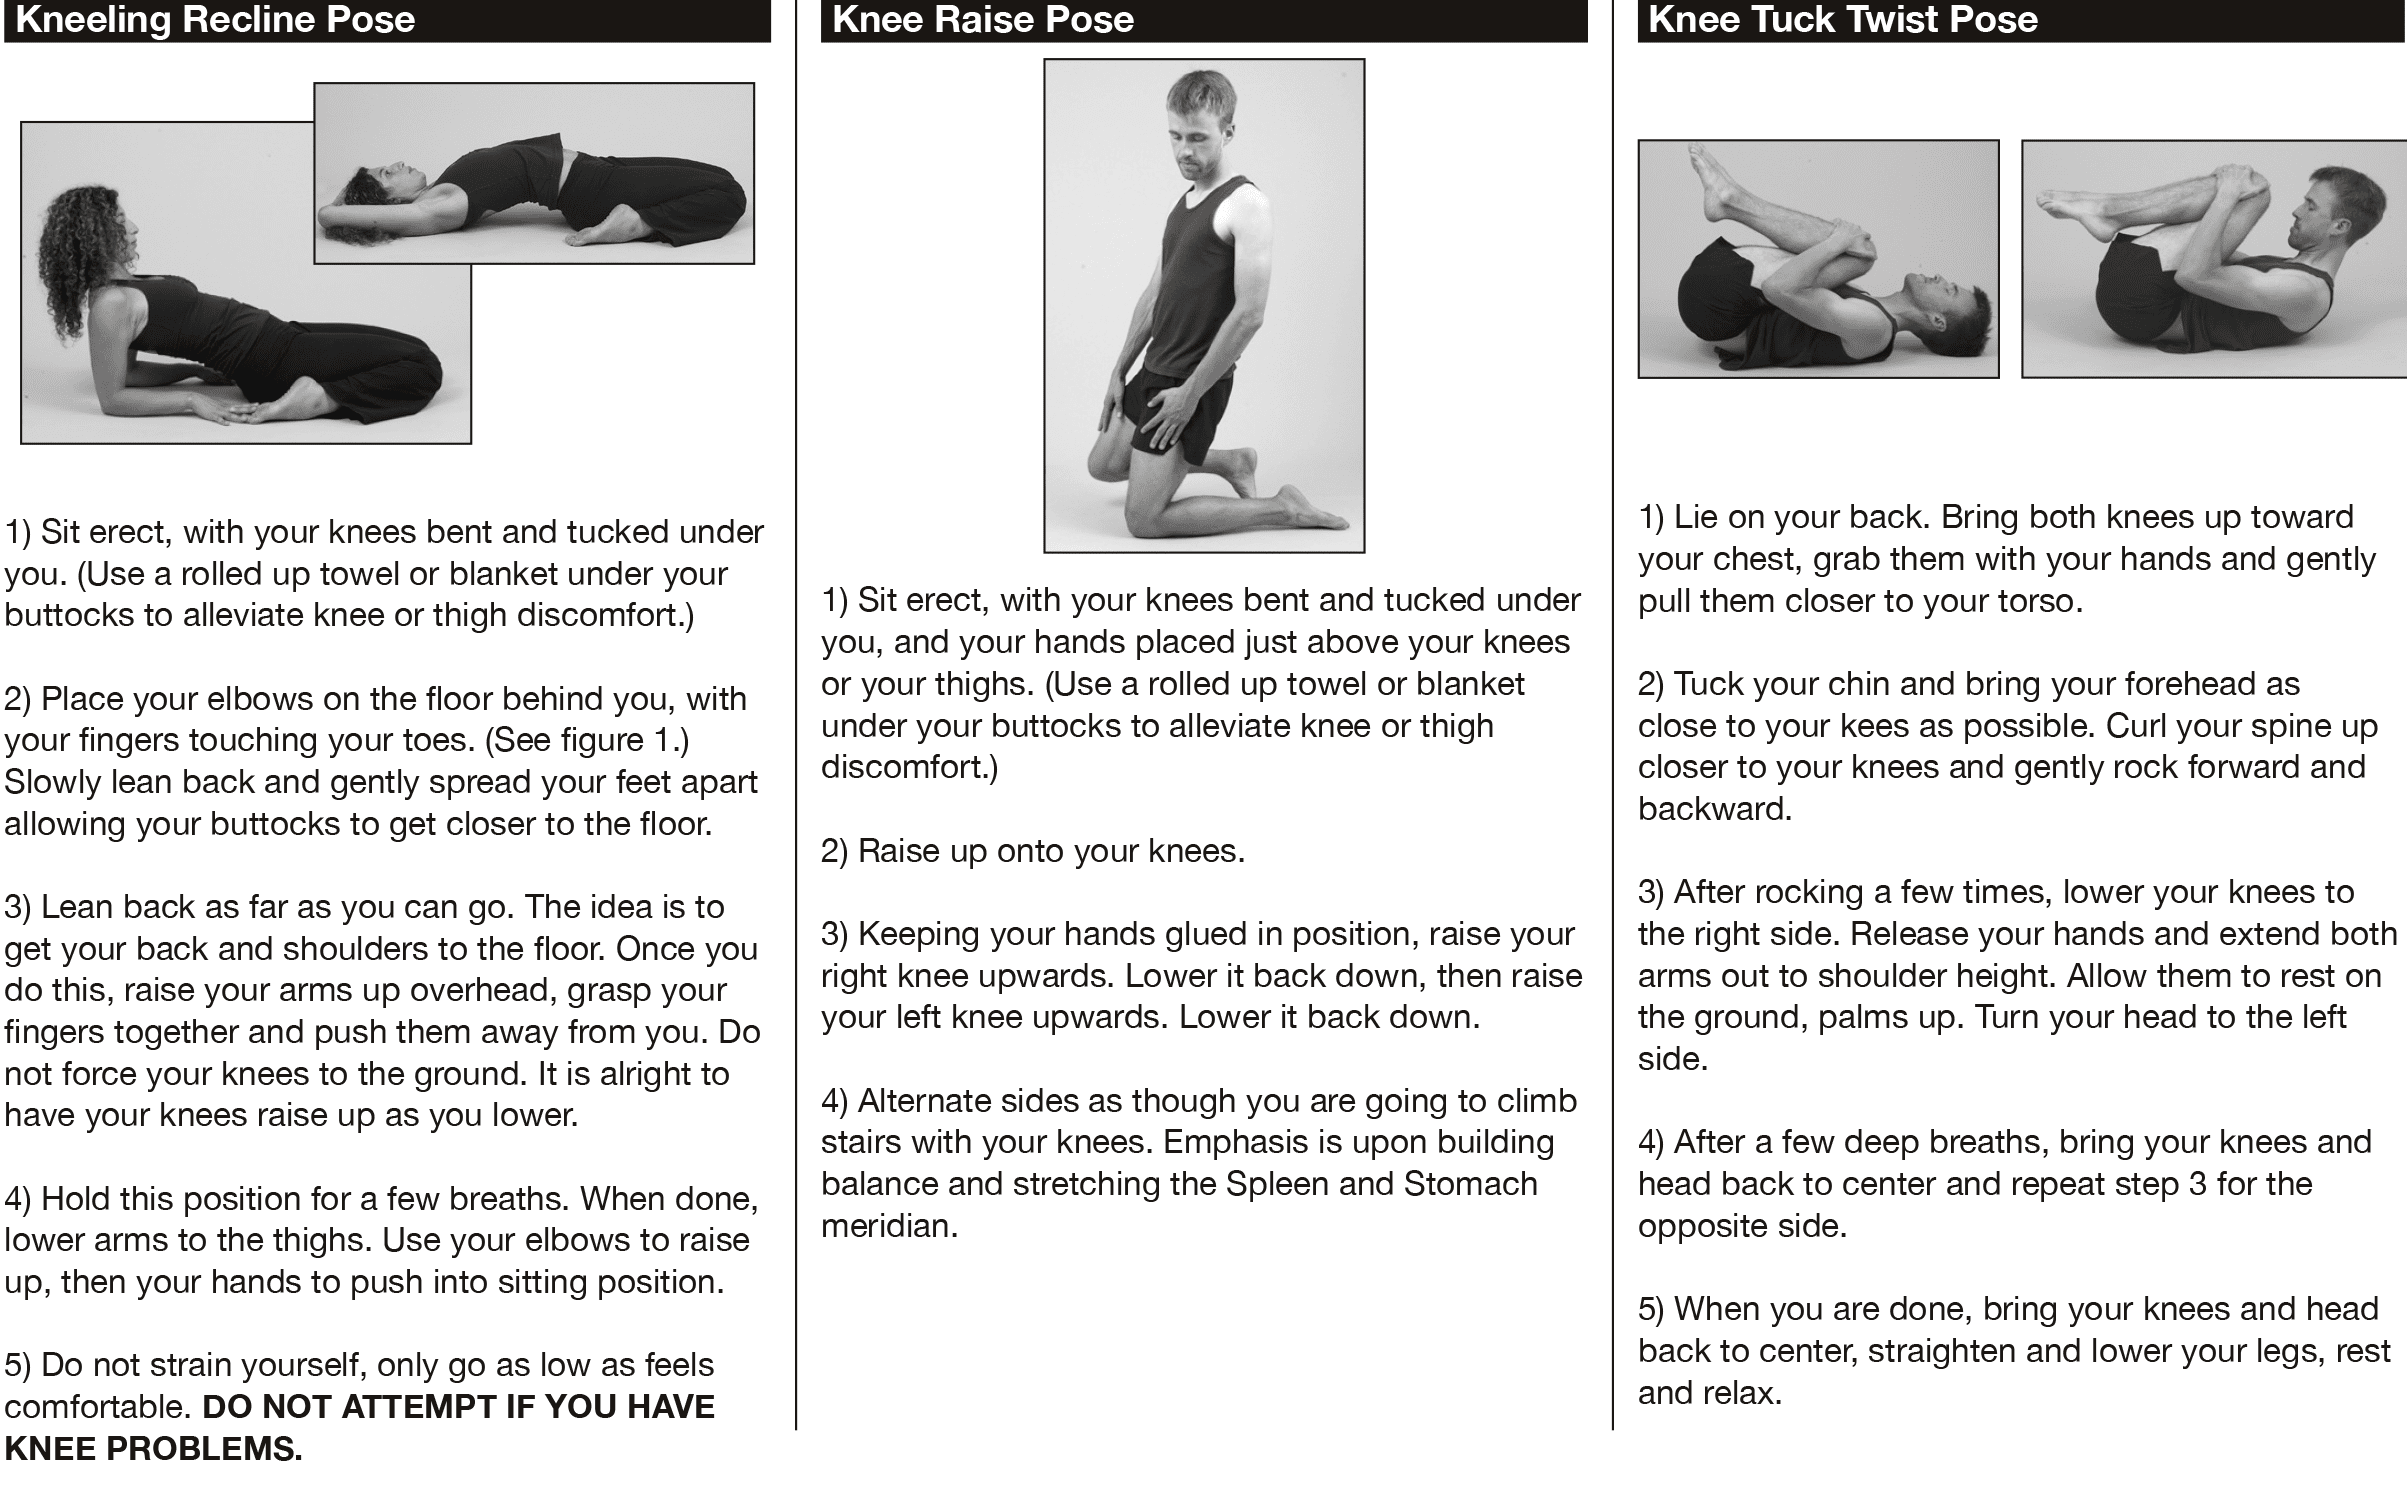 Diagrams and instructions for kneeling recline pose, knee raise pose, and knee tuck twist pose